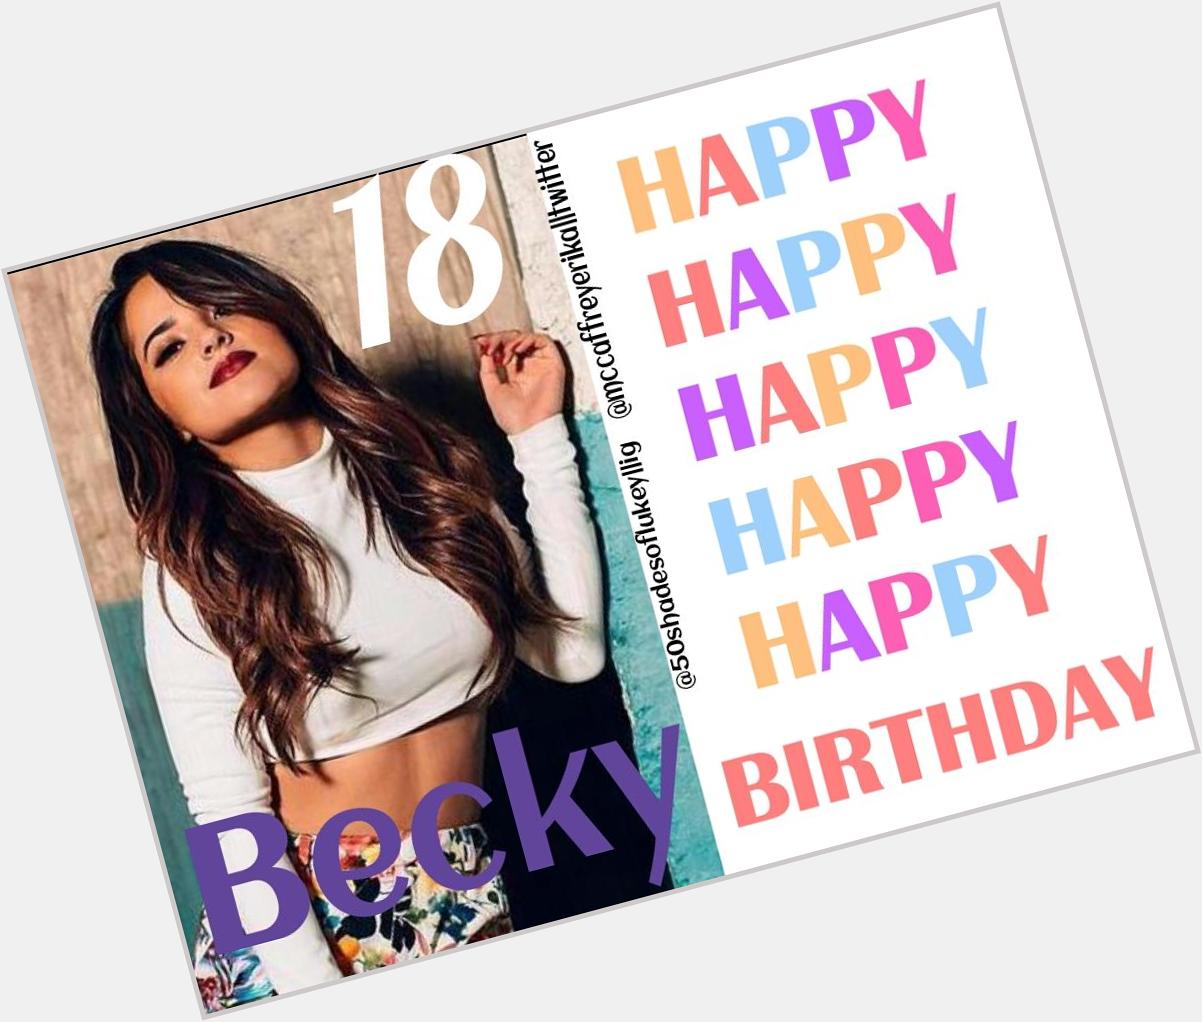 Happy birthday 2 the talented/amazing/gorgeous Becky G! Love u so much becky have a great birthday        